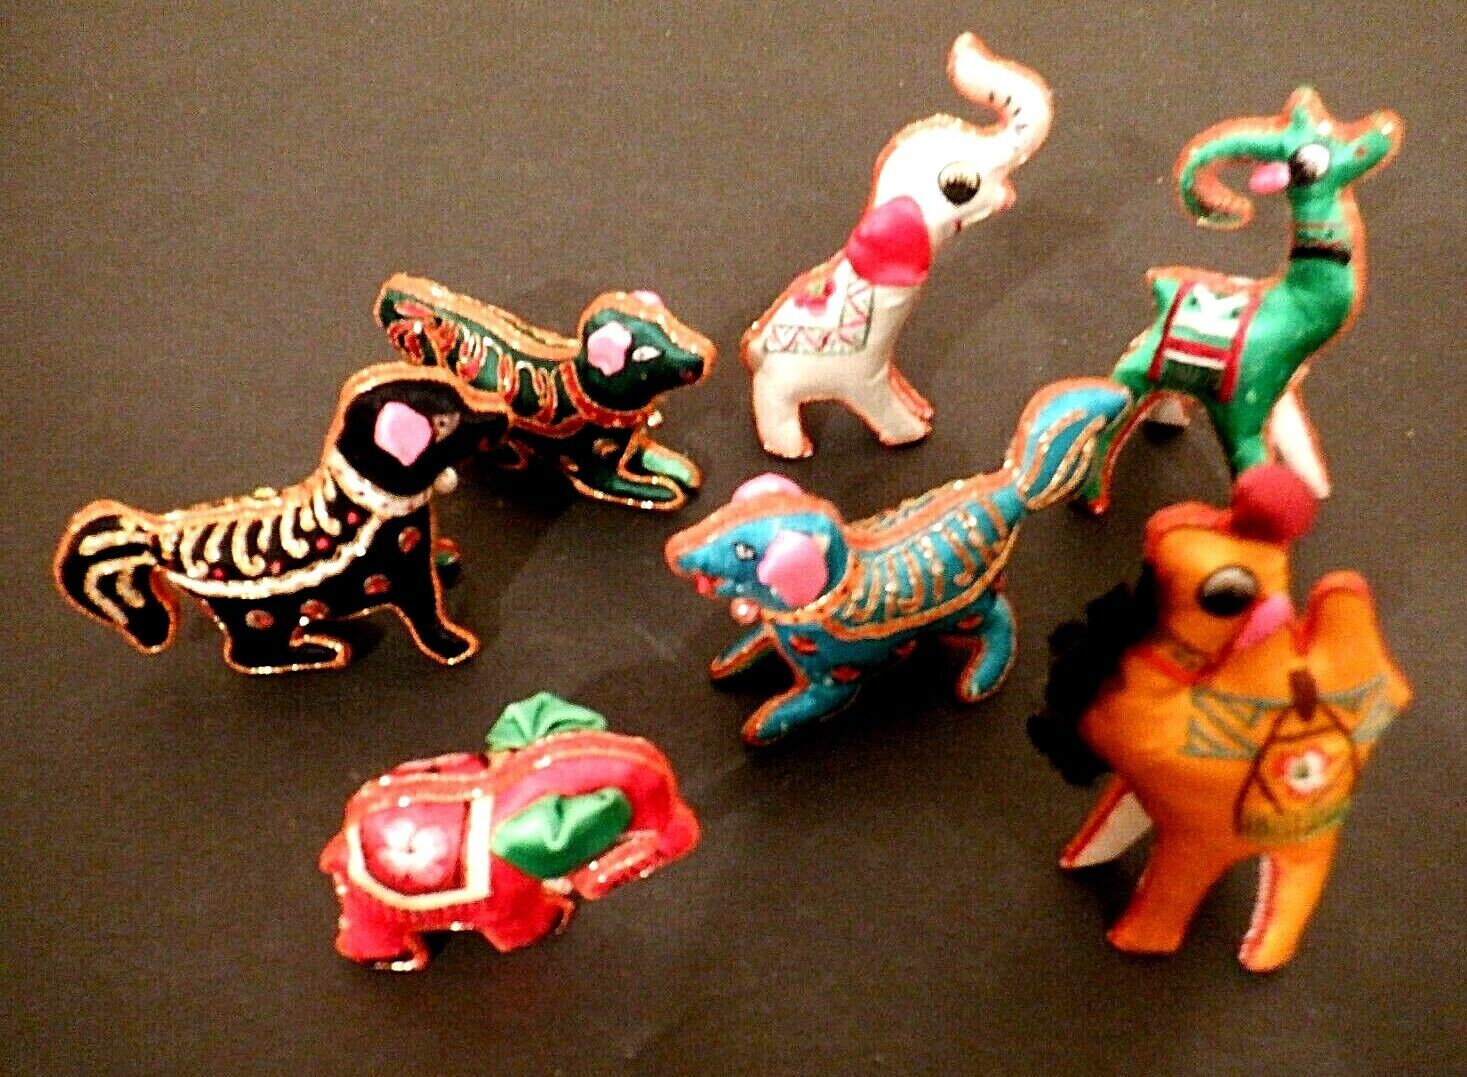 Vintage Chinese Silk and Embroidered Animal Figures 6 pieces Без бренда - фотография #10